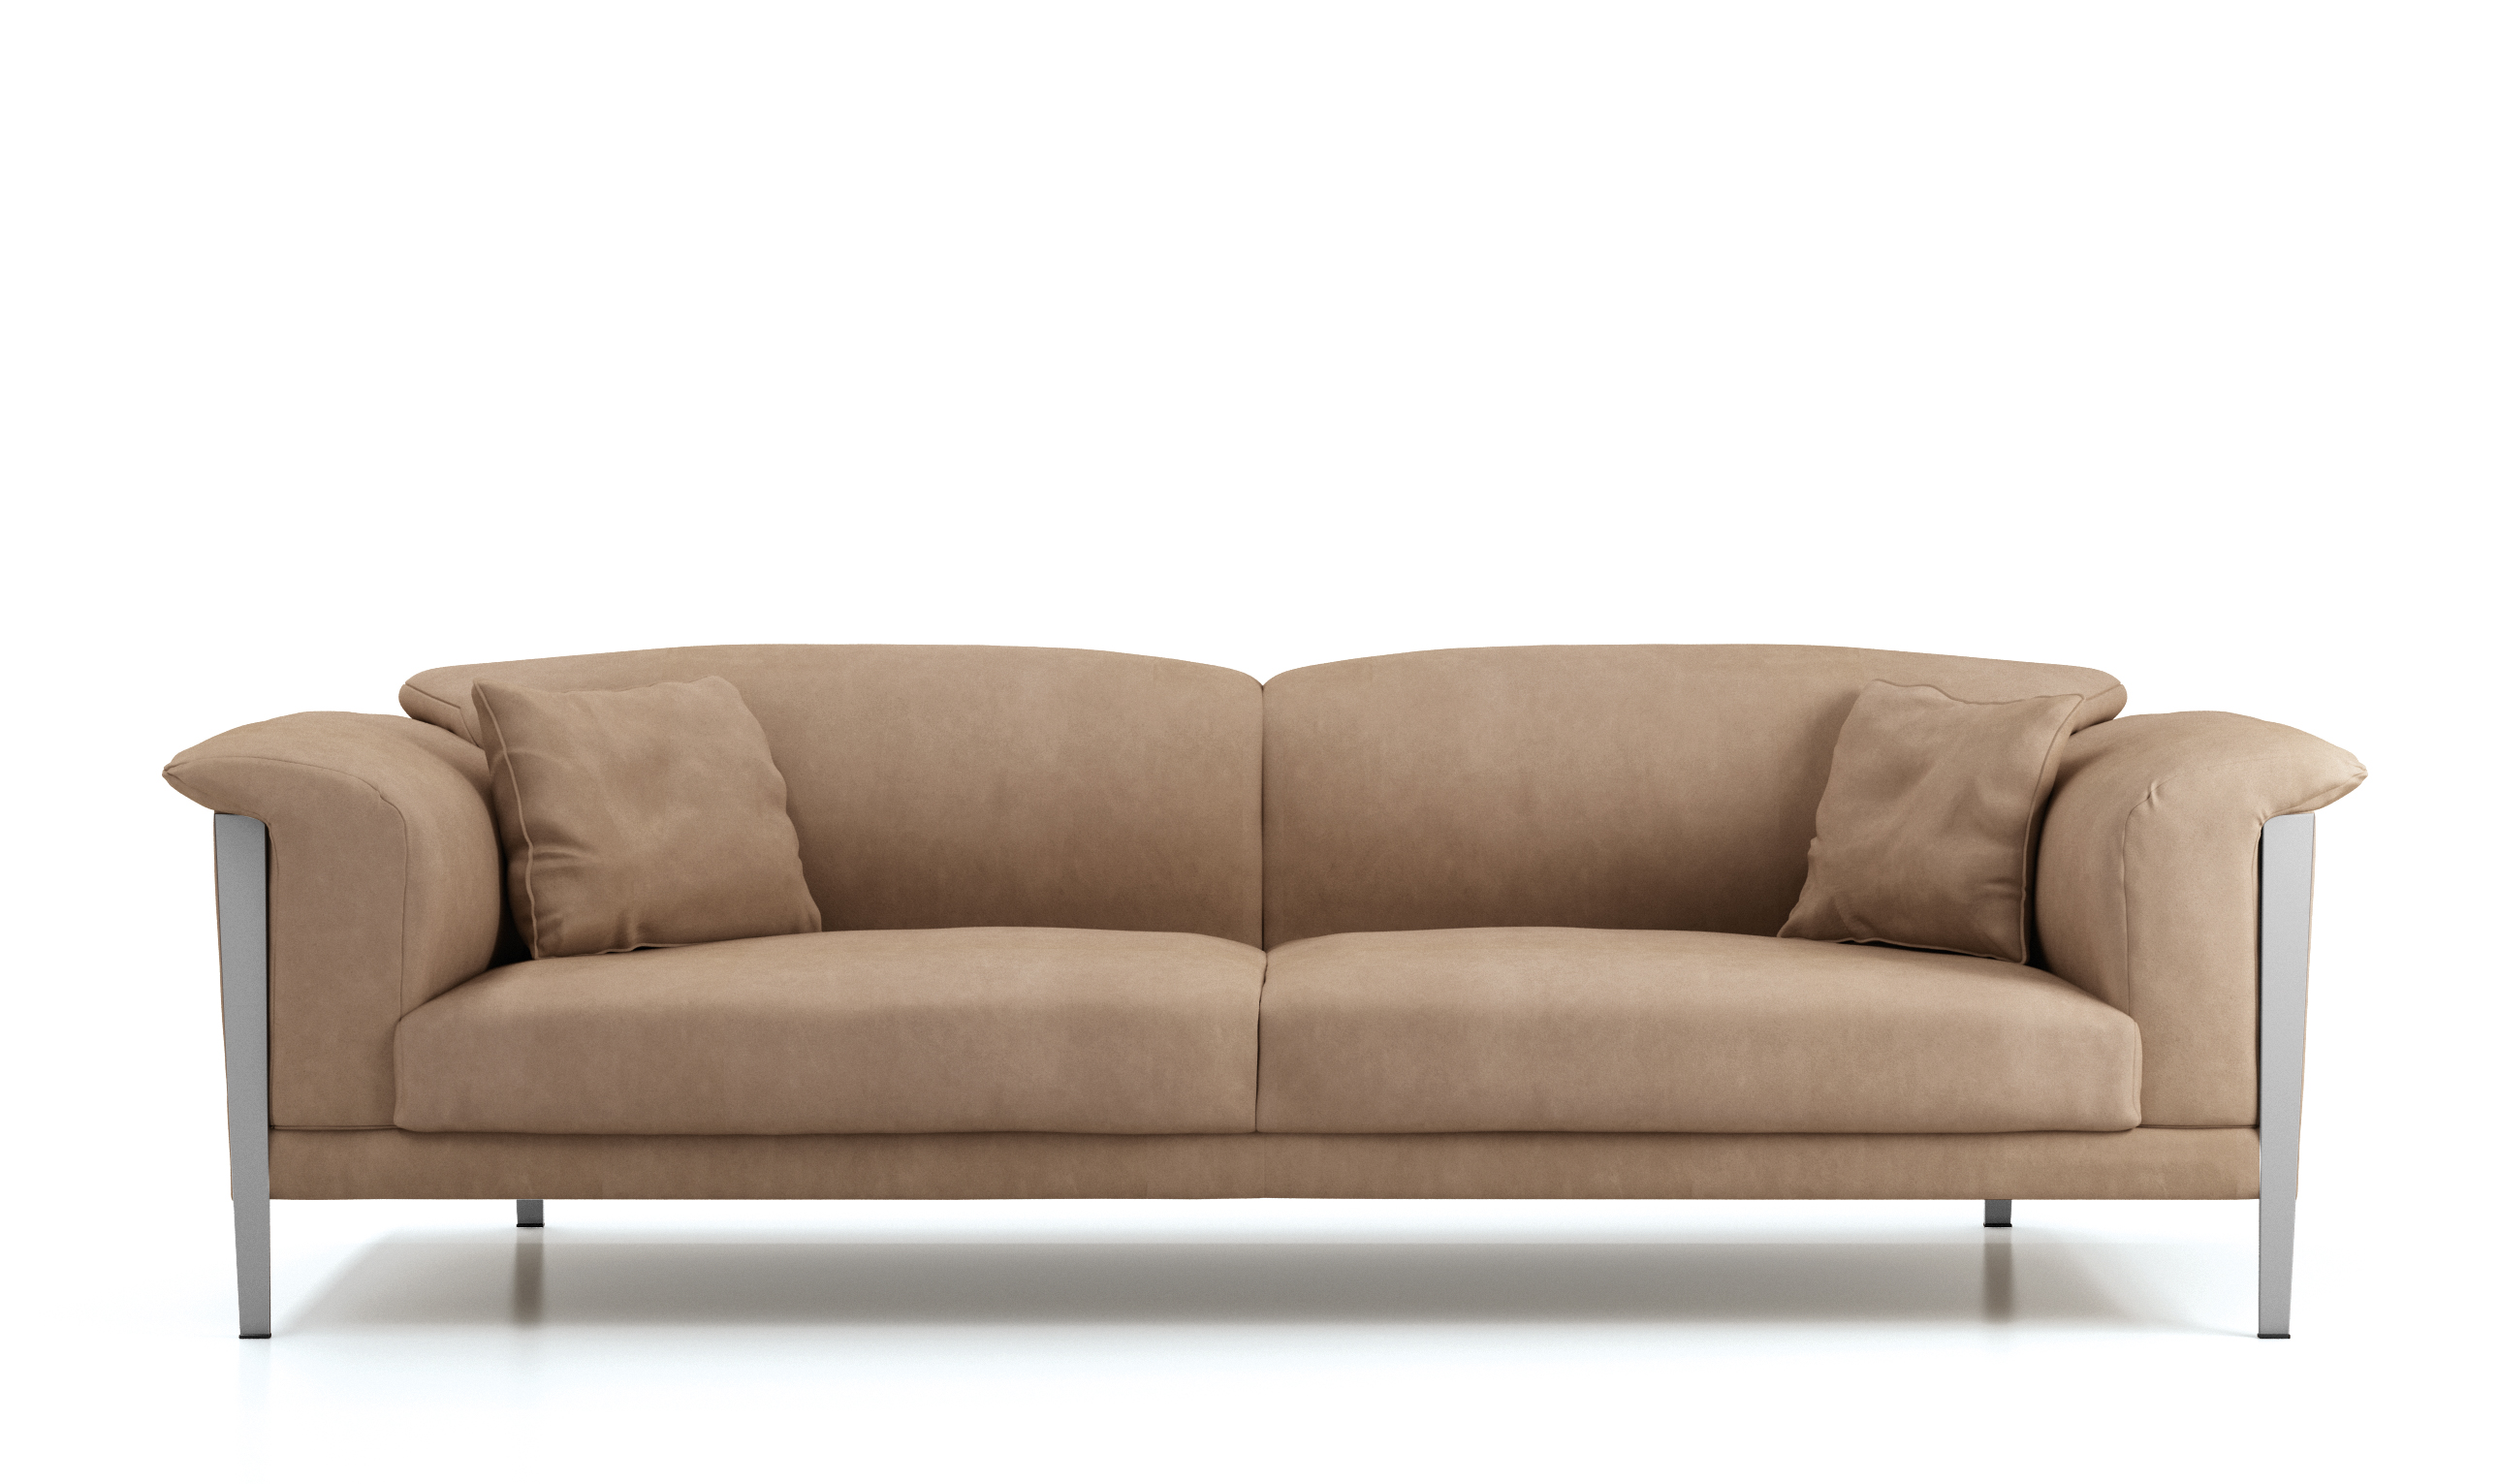 memorial day sale on leather cream color sofa